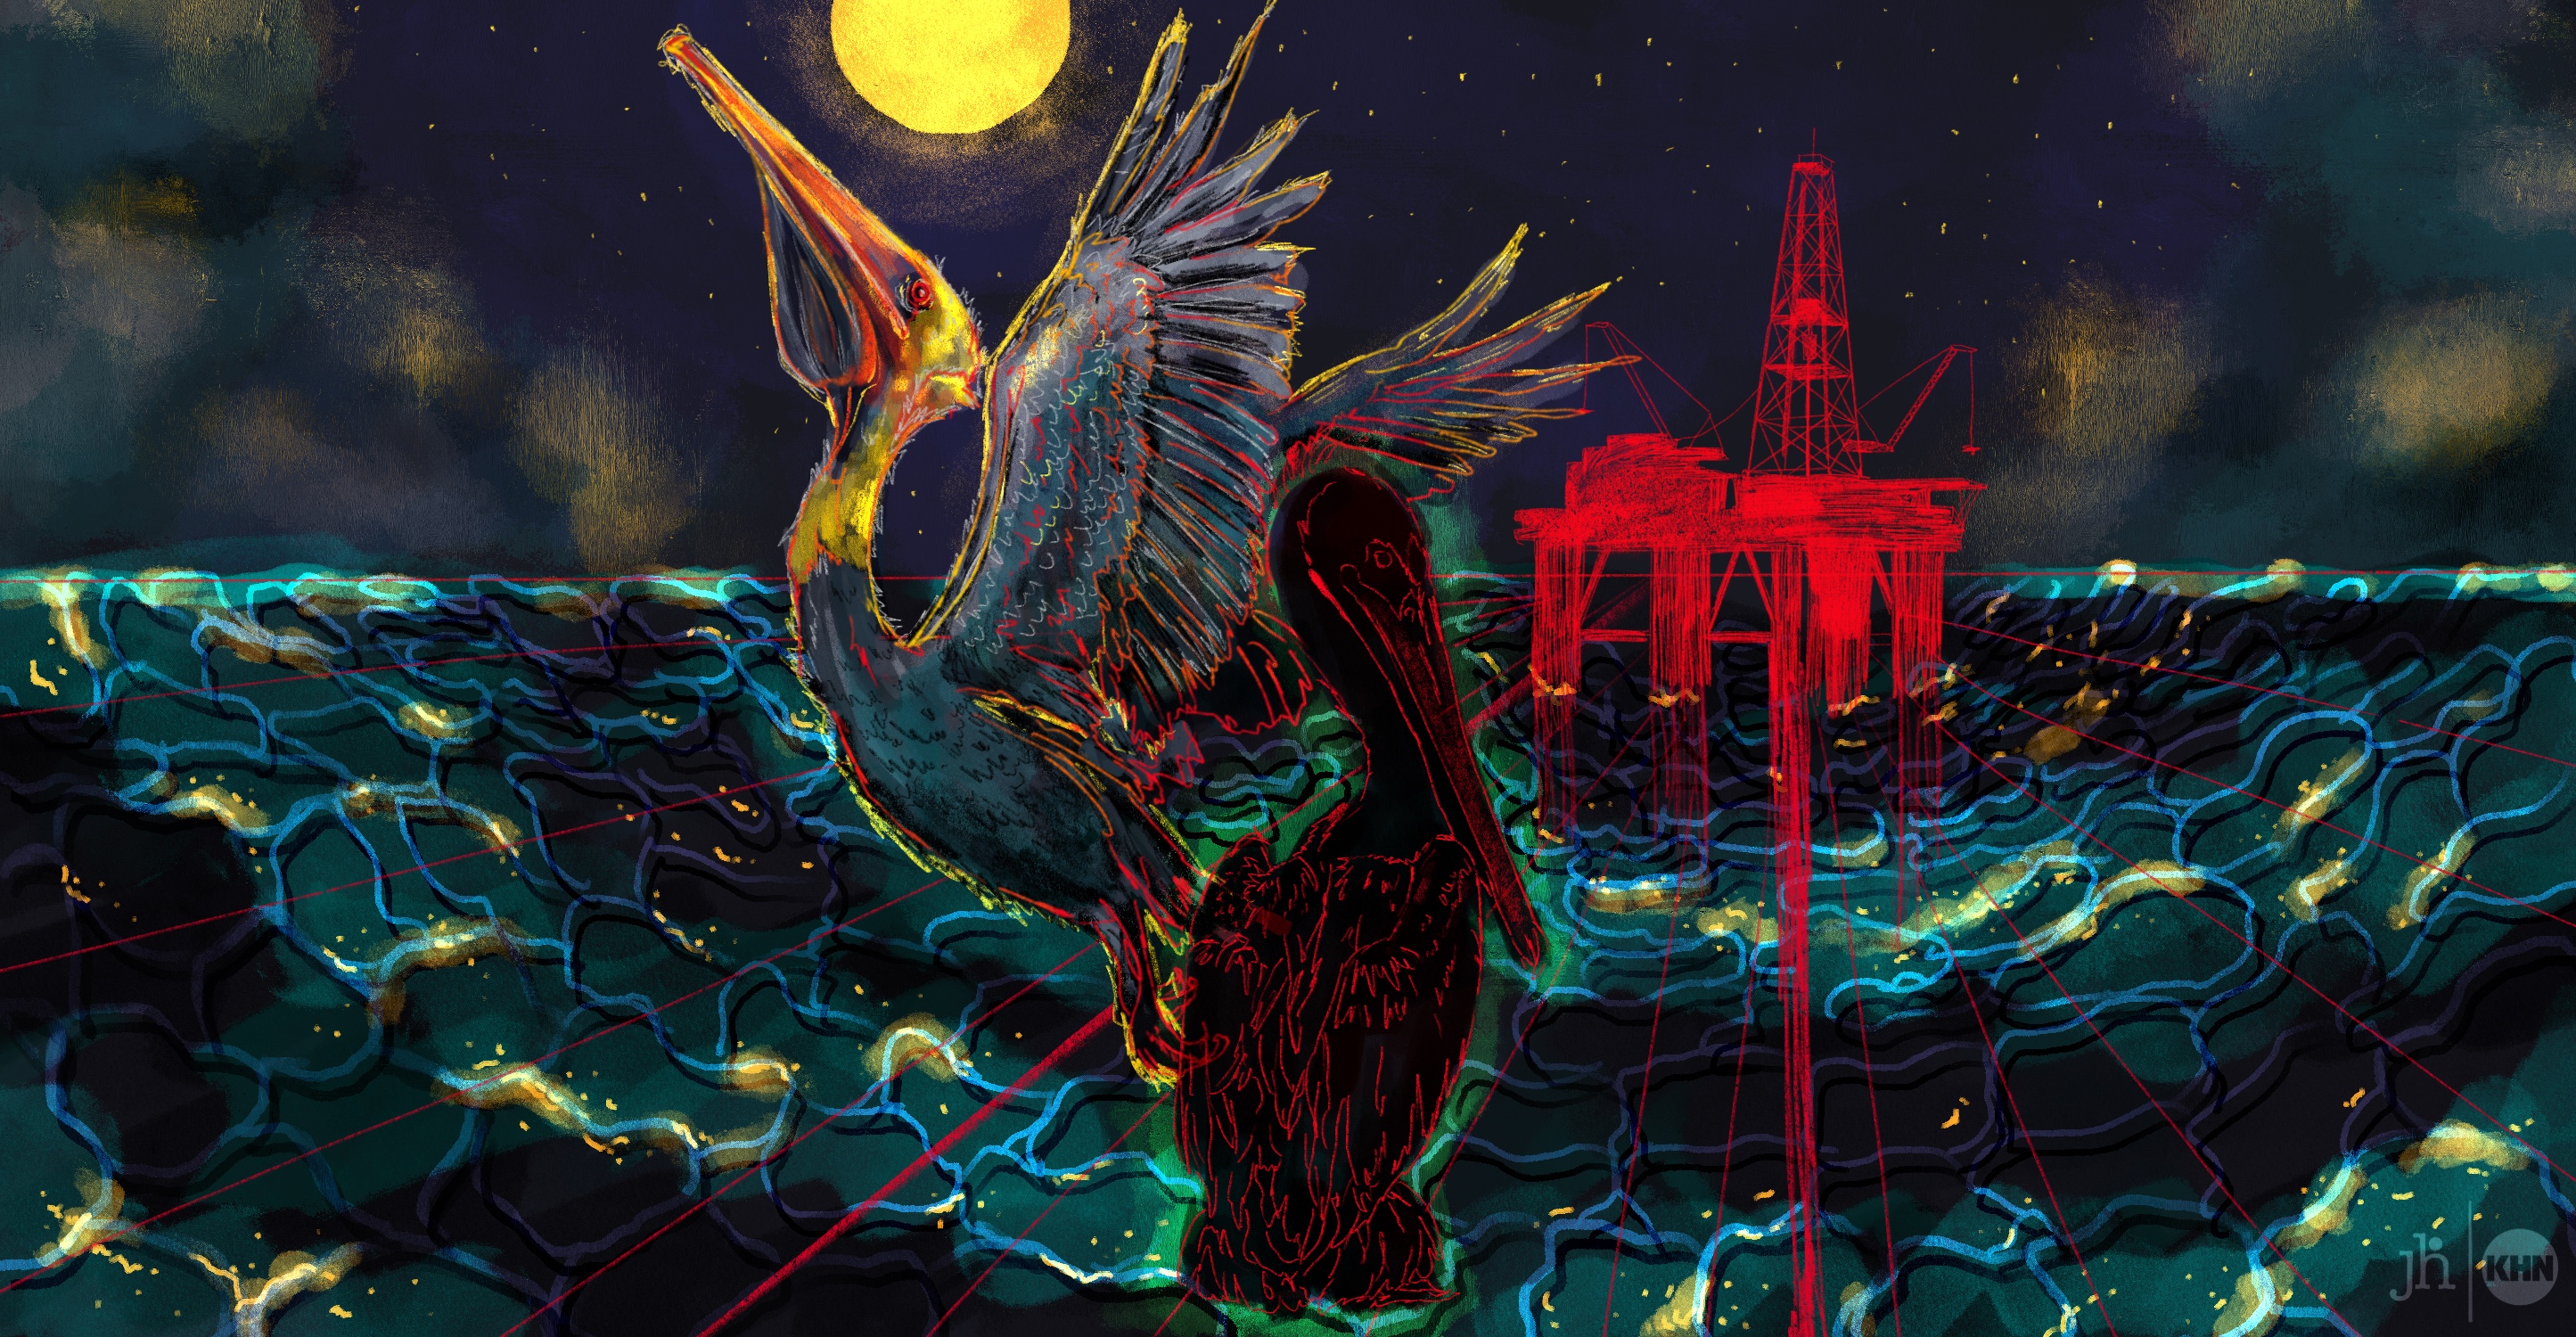 A digital illustration in watercolor and pencil. It is a nighttime scene. The artwork shows an off-shore oil rig, drawn in bright red pencil, out at sea. The water is dark black with hints of reflection from a full moon overhead. In the center of the image there are two Louisiana brown pelicans. One is taking flight, highlighted by the gold light of the moon. The other bird, which has its wings tightly closed, appears somewhat ghostly, drawn in red pencil over a black silhouette.  